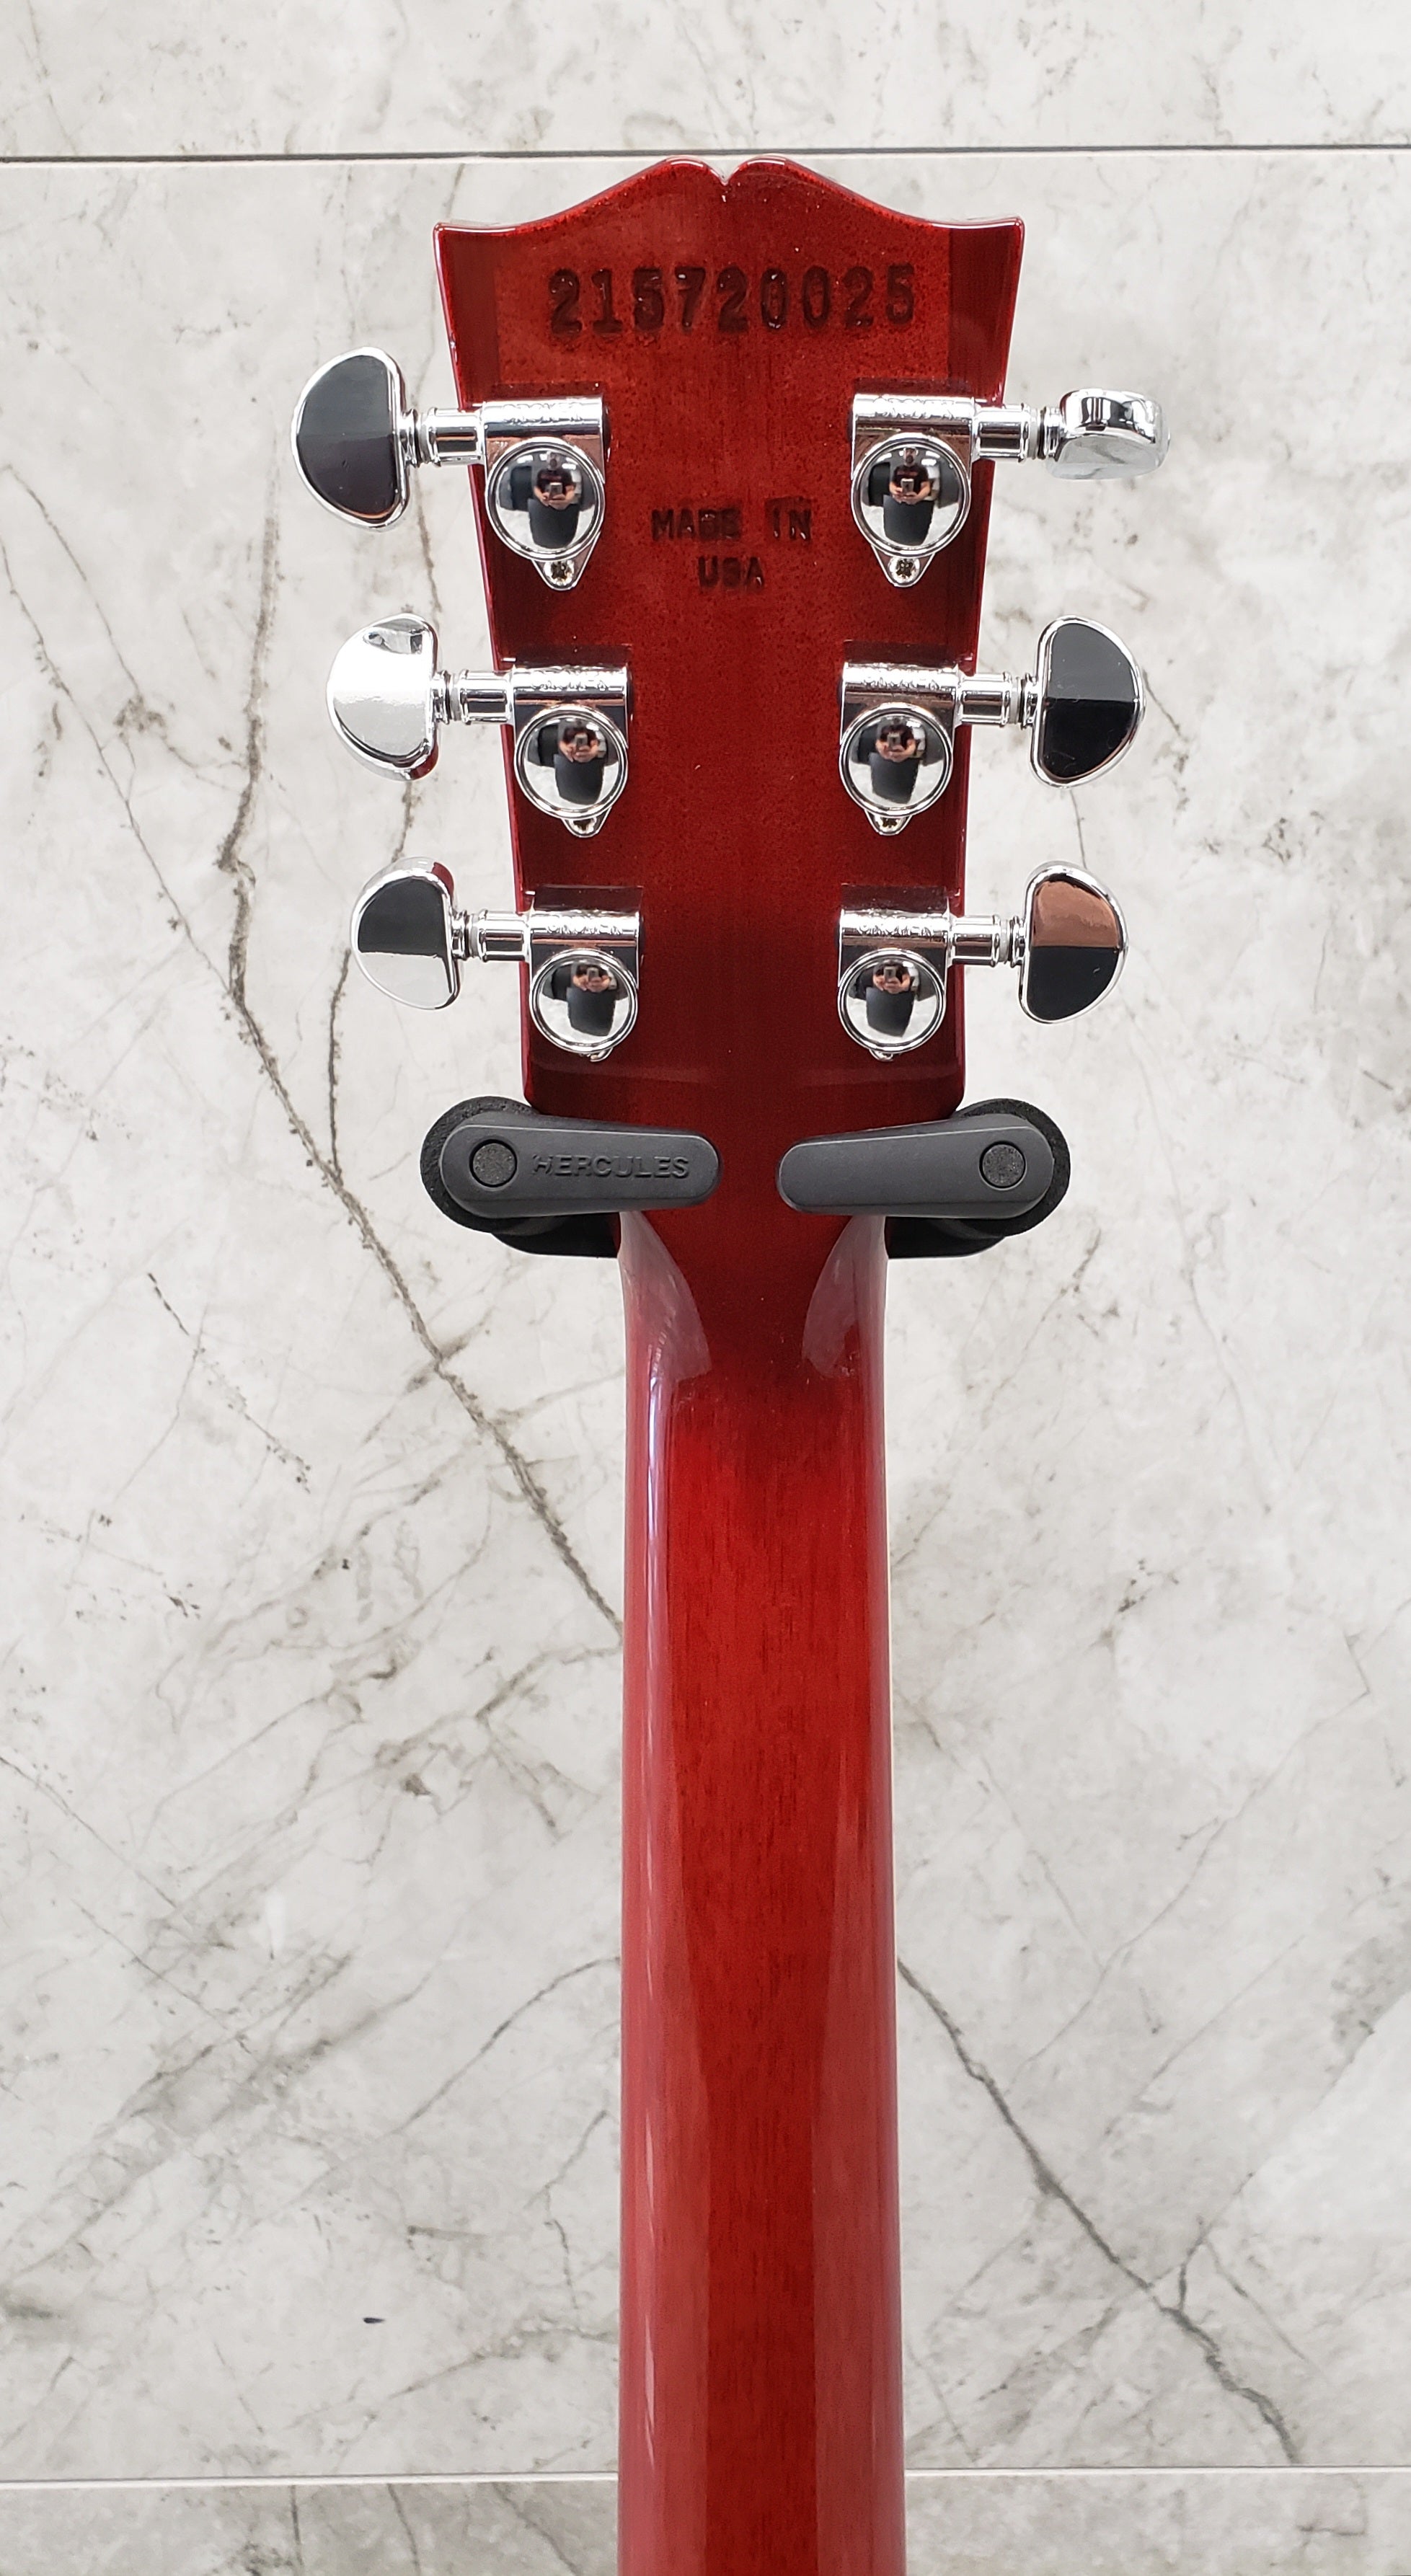 Gibson SG Standard SGS00HCCH Heritage Cherry SERIAL NUMBER 215720025 - 7.0 LBS